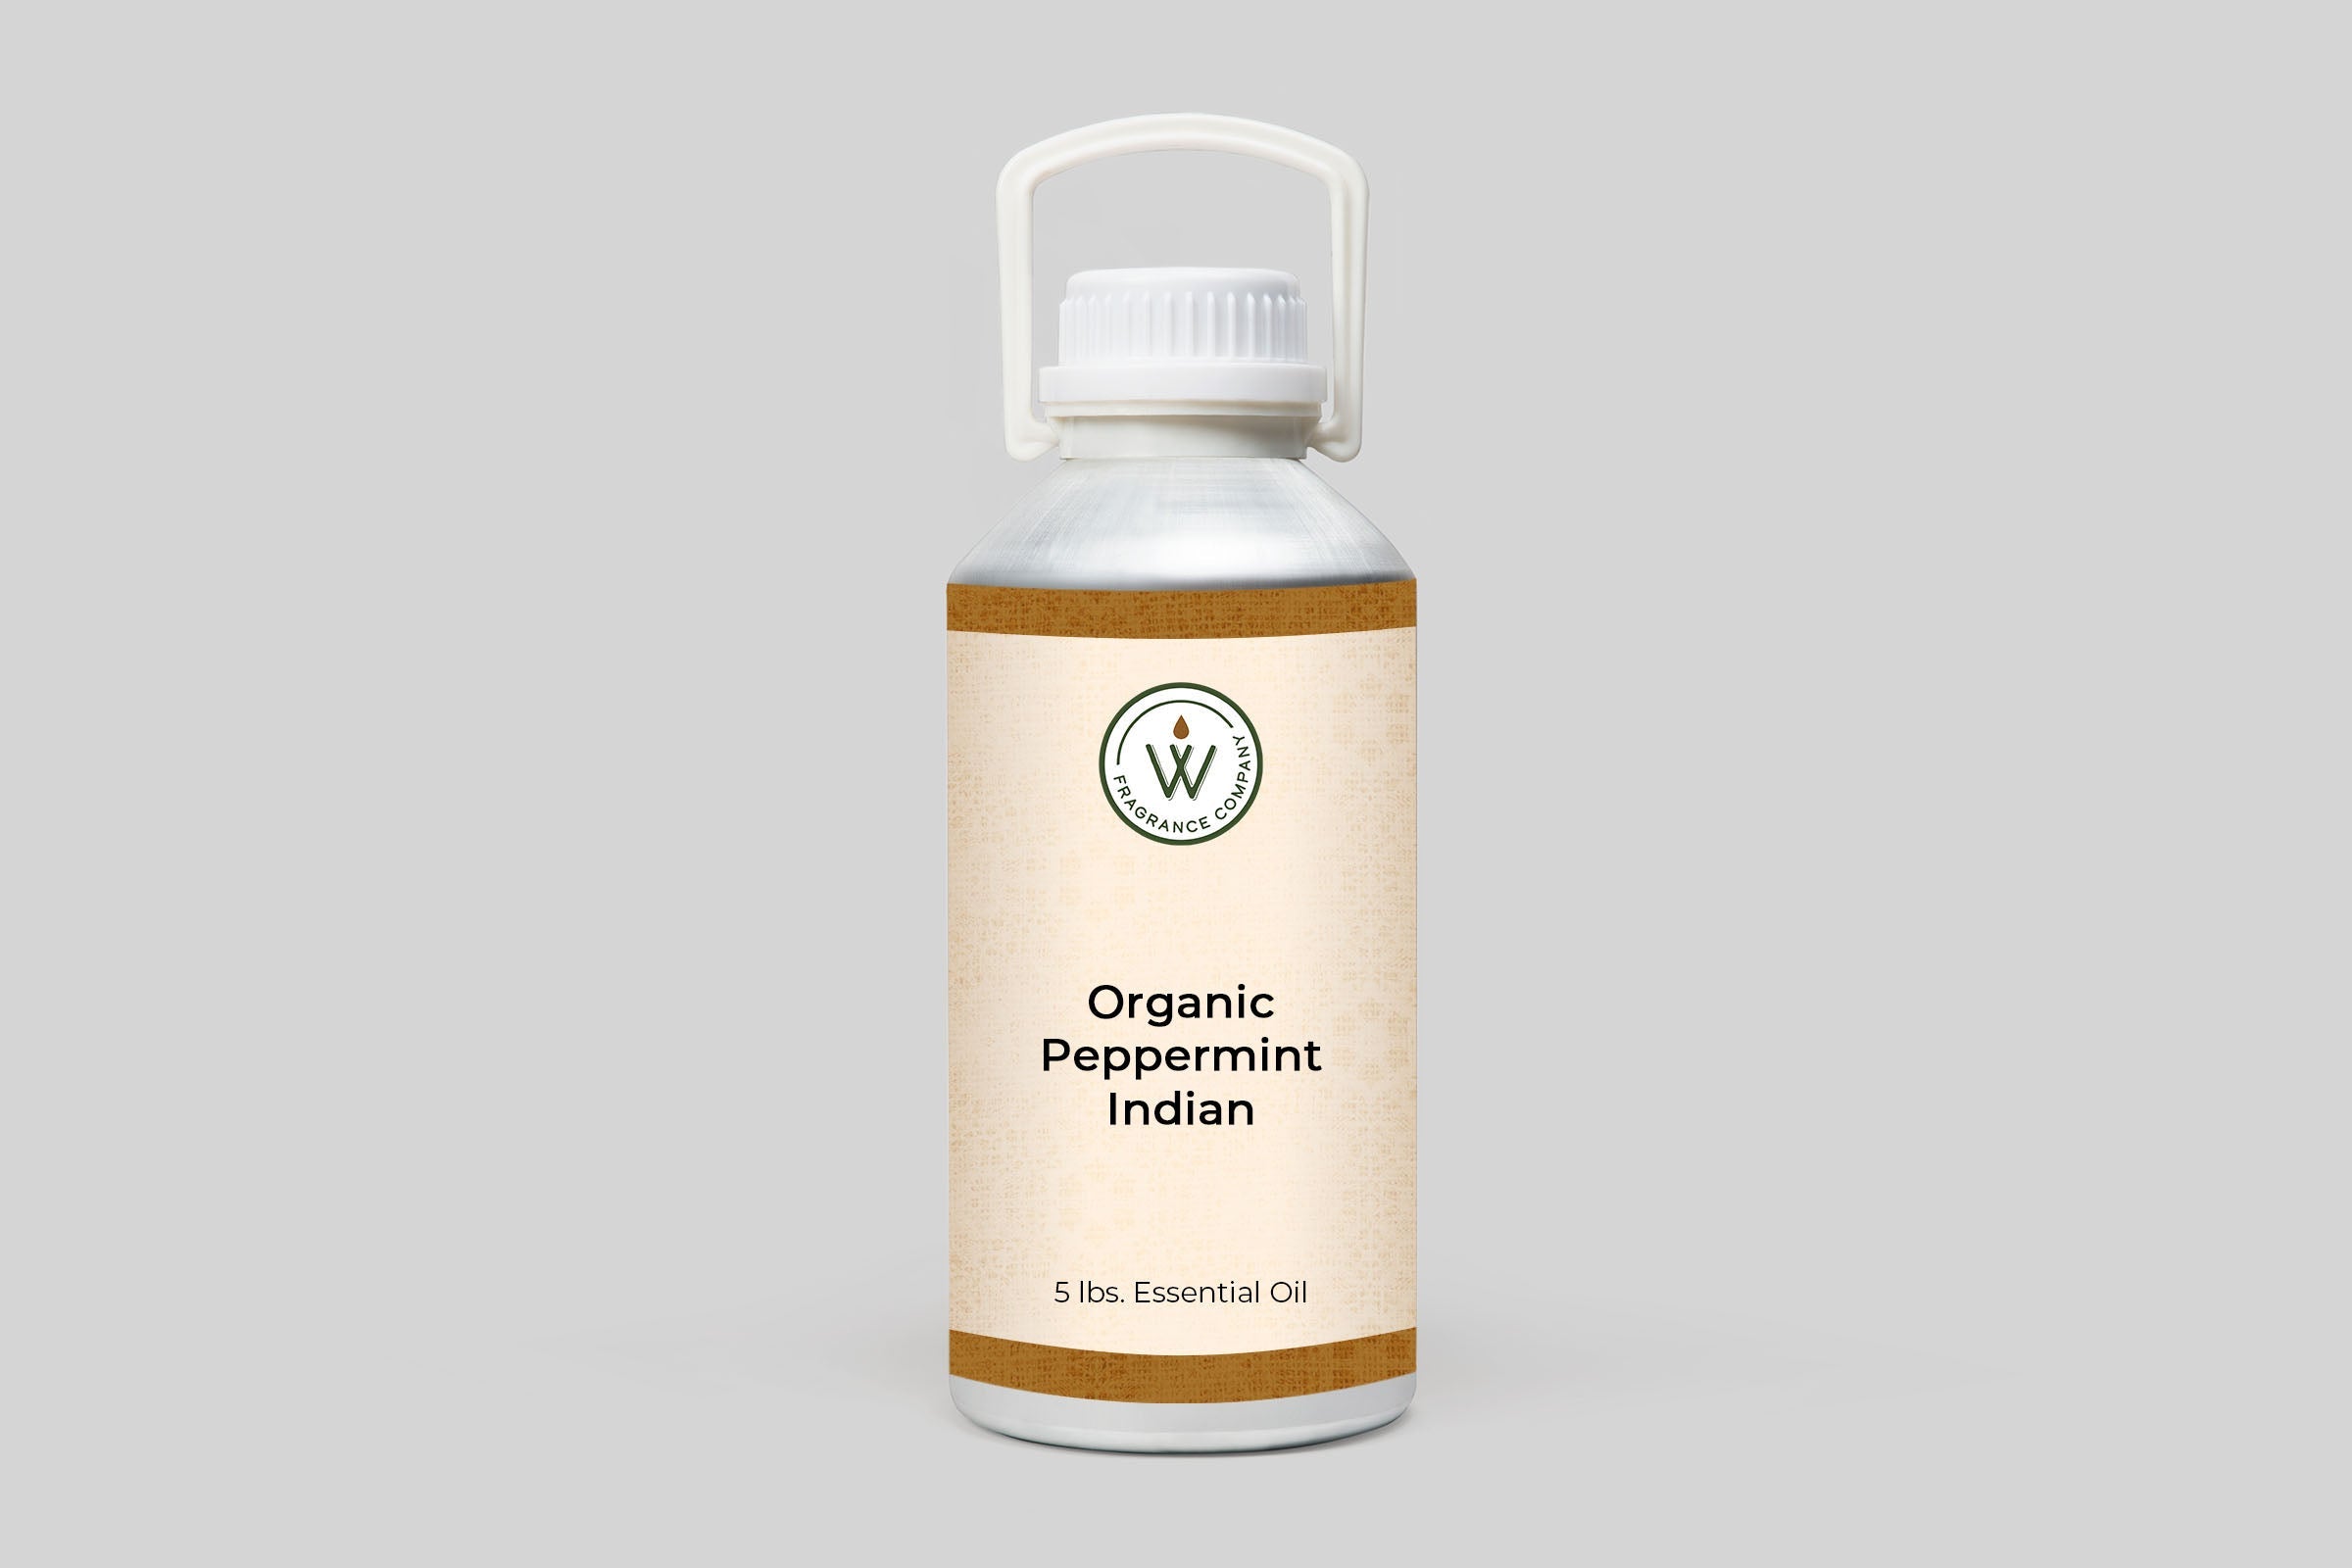 Organic Peppermint Indian Essential Oil